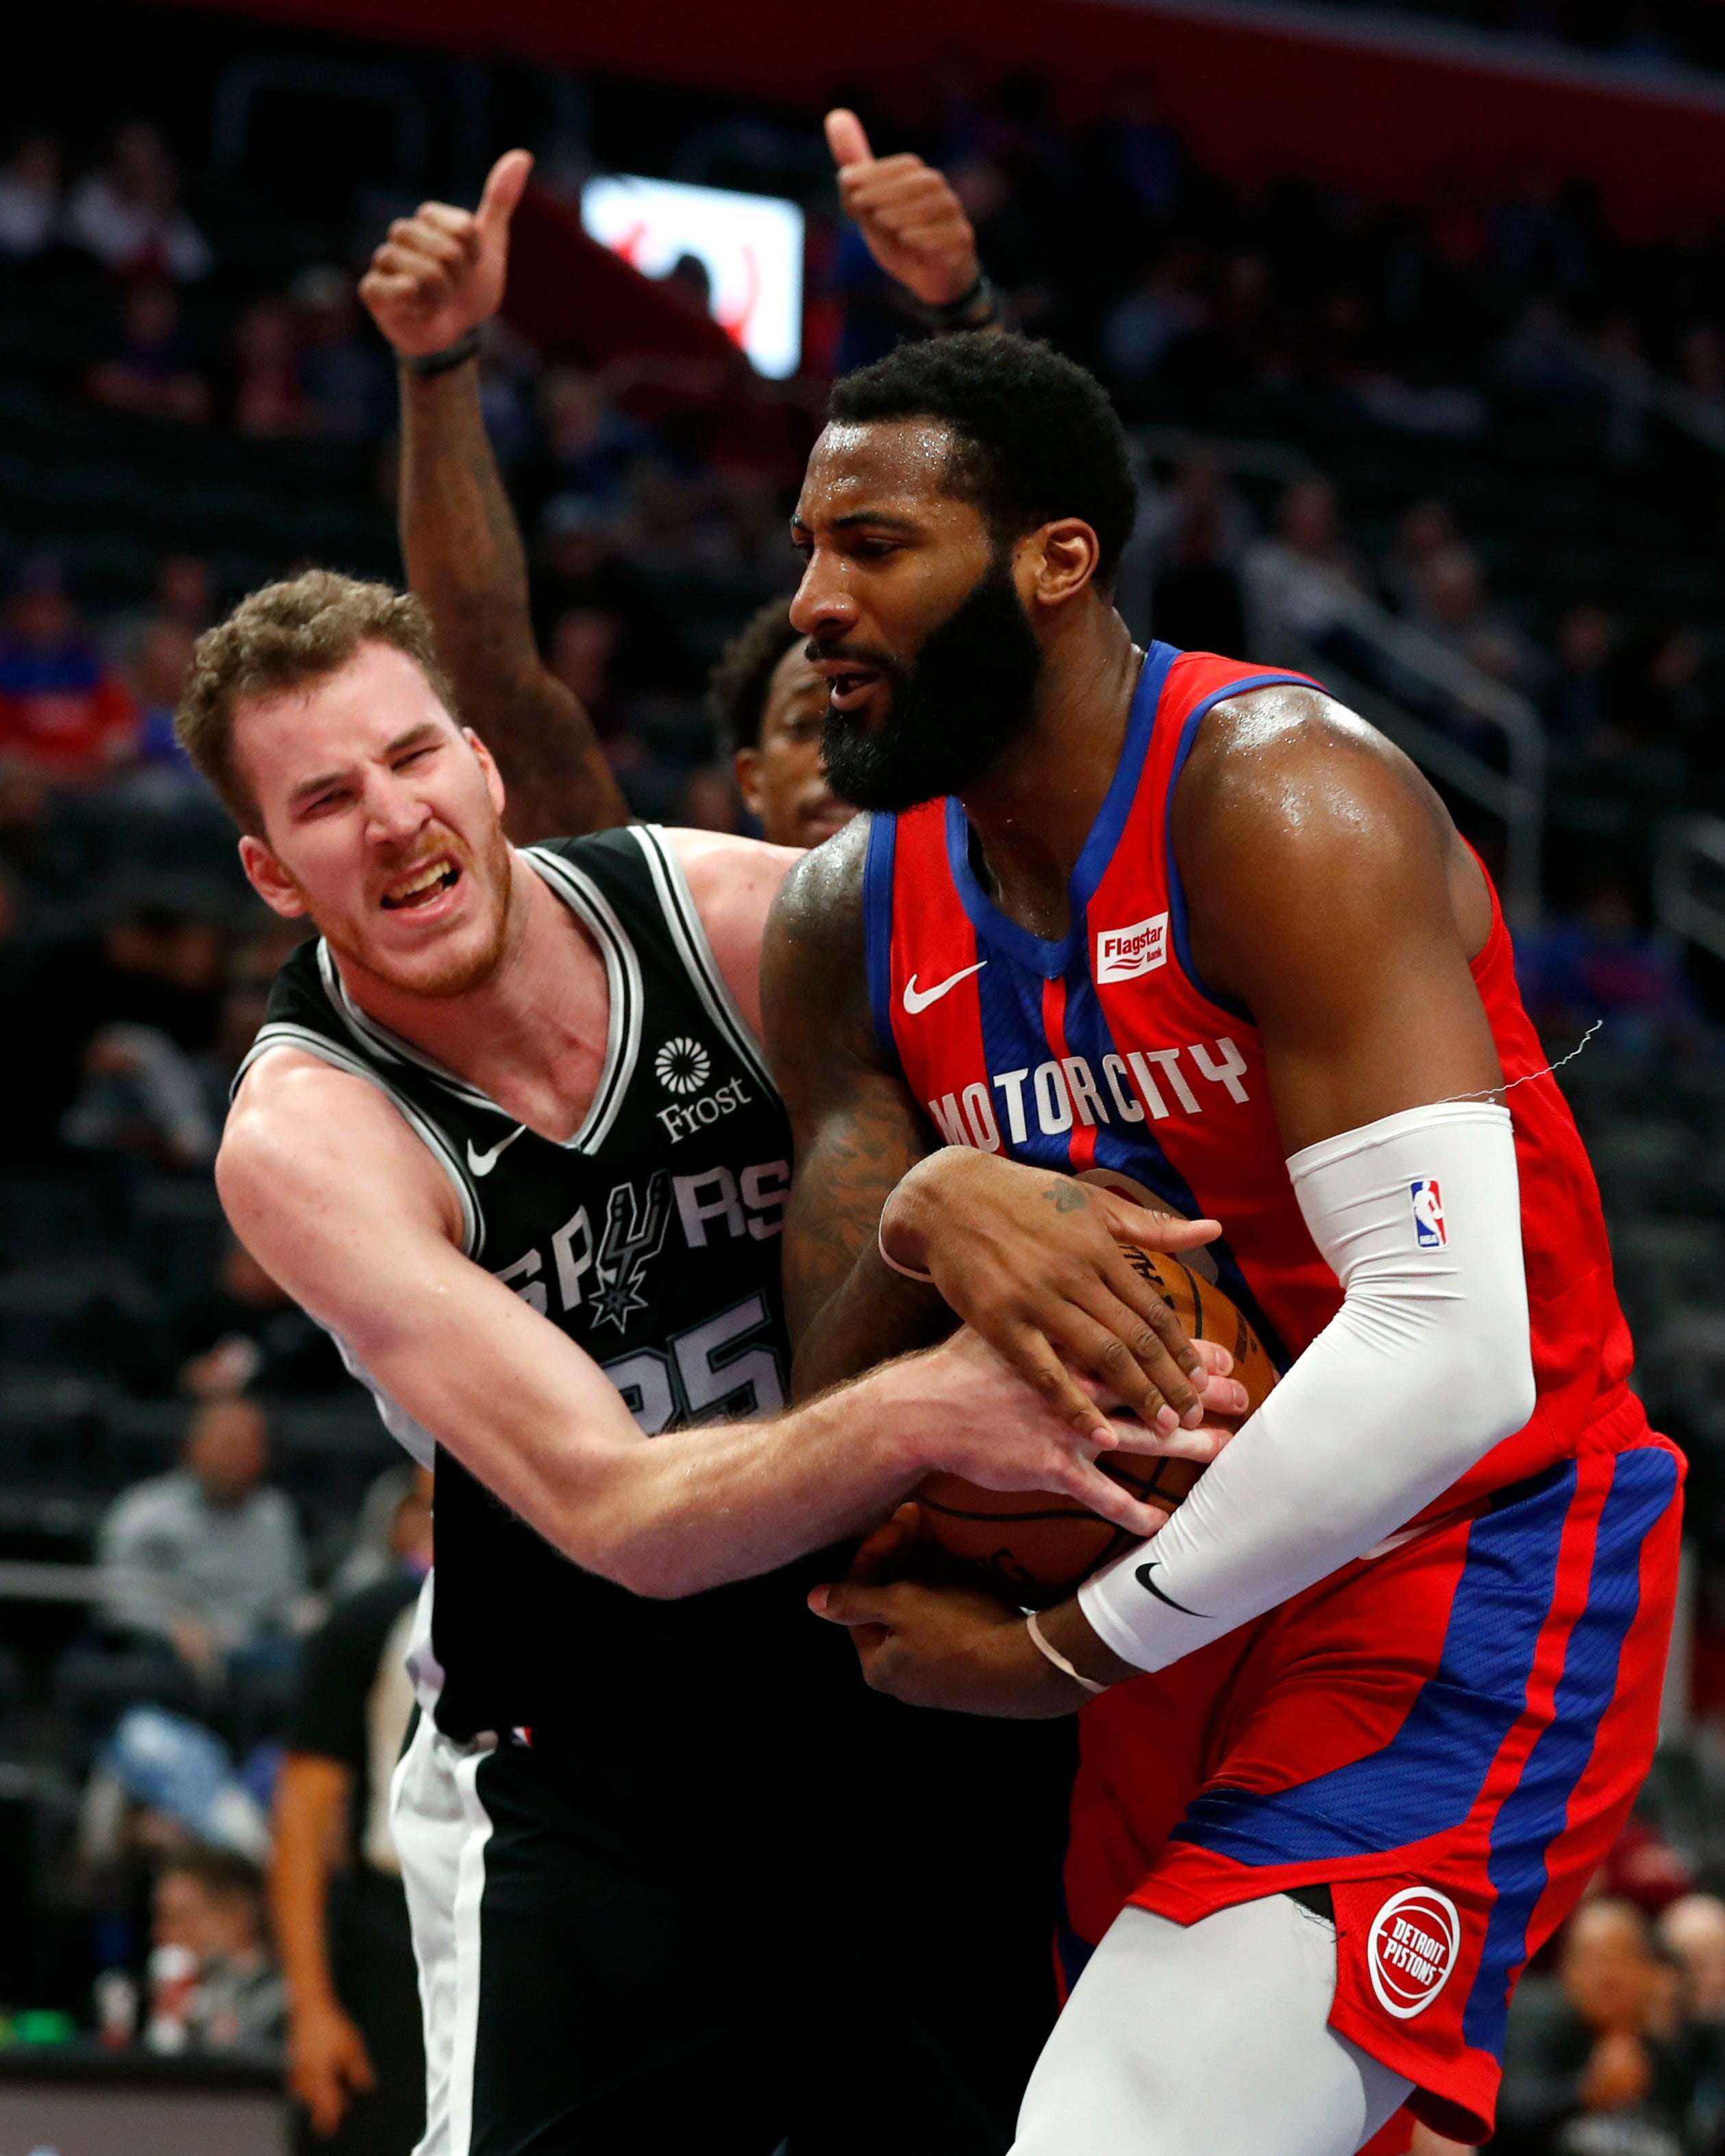 San Antonio Spurs center Jakob Poeltl (25) attempts to take the ball away from Detroit Pistons center Andre Drummond during the second half.